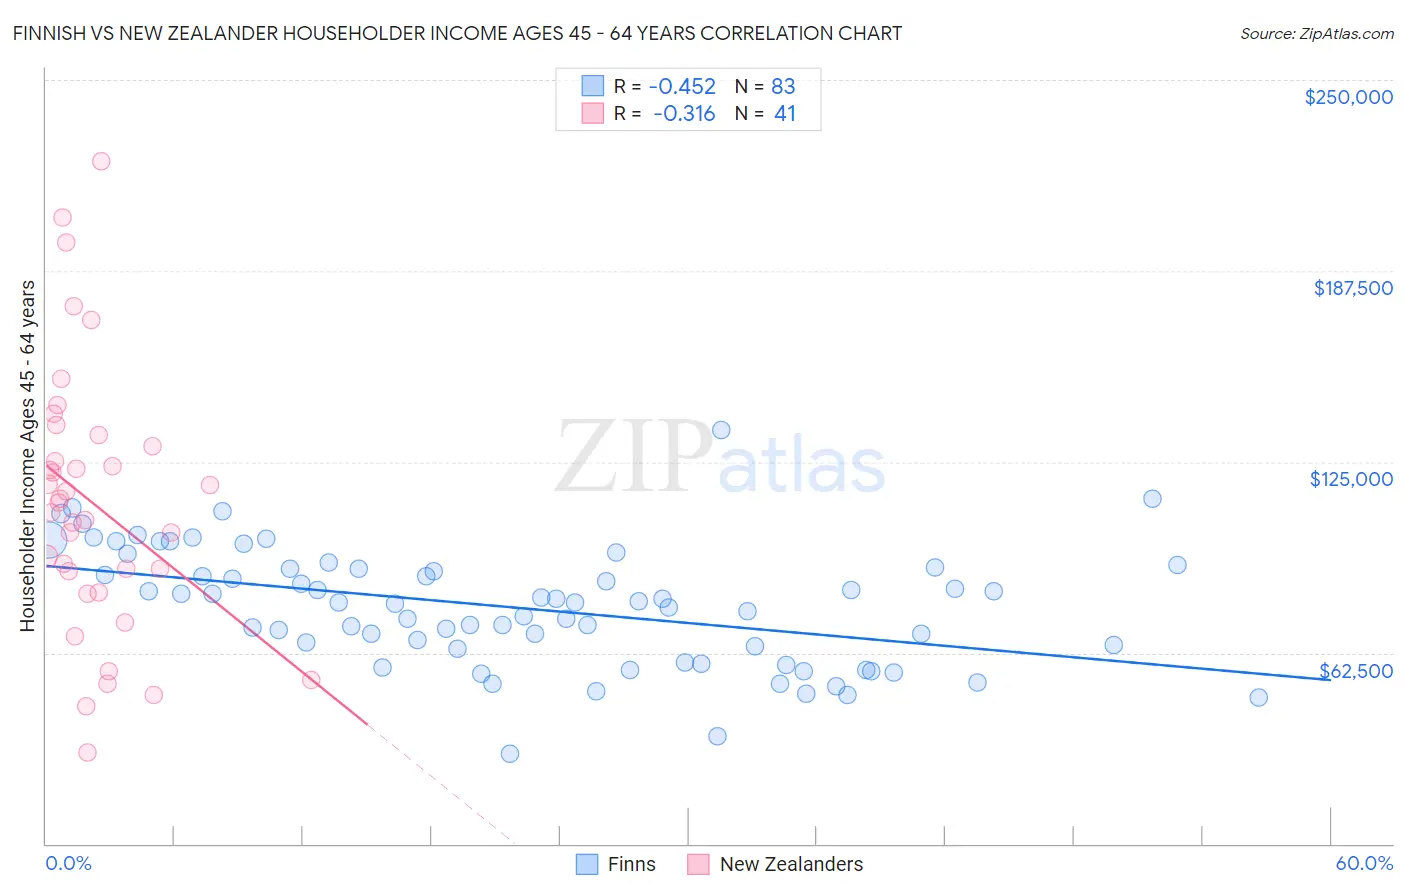 Finnish vs New Zealander Householder Income Ages 45 - 64 years